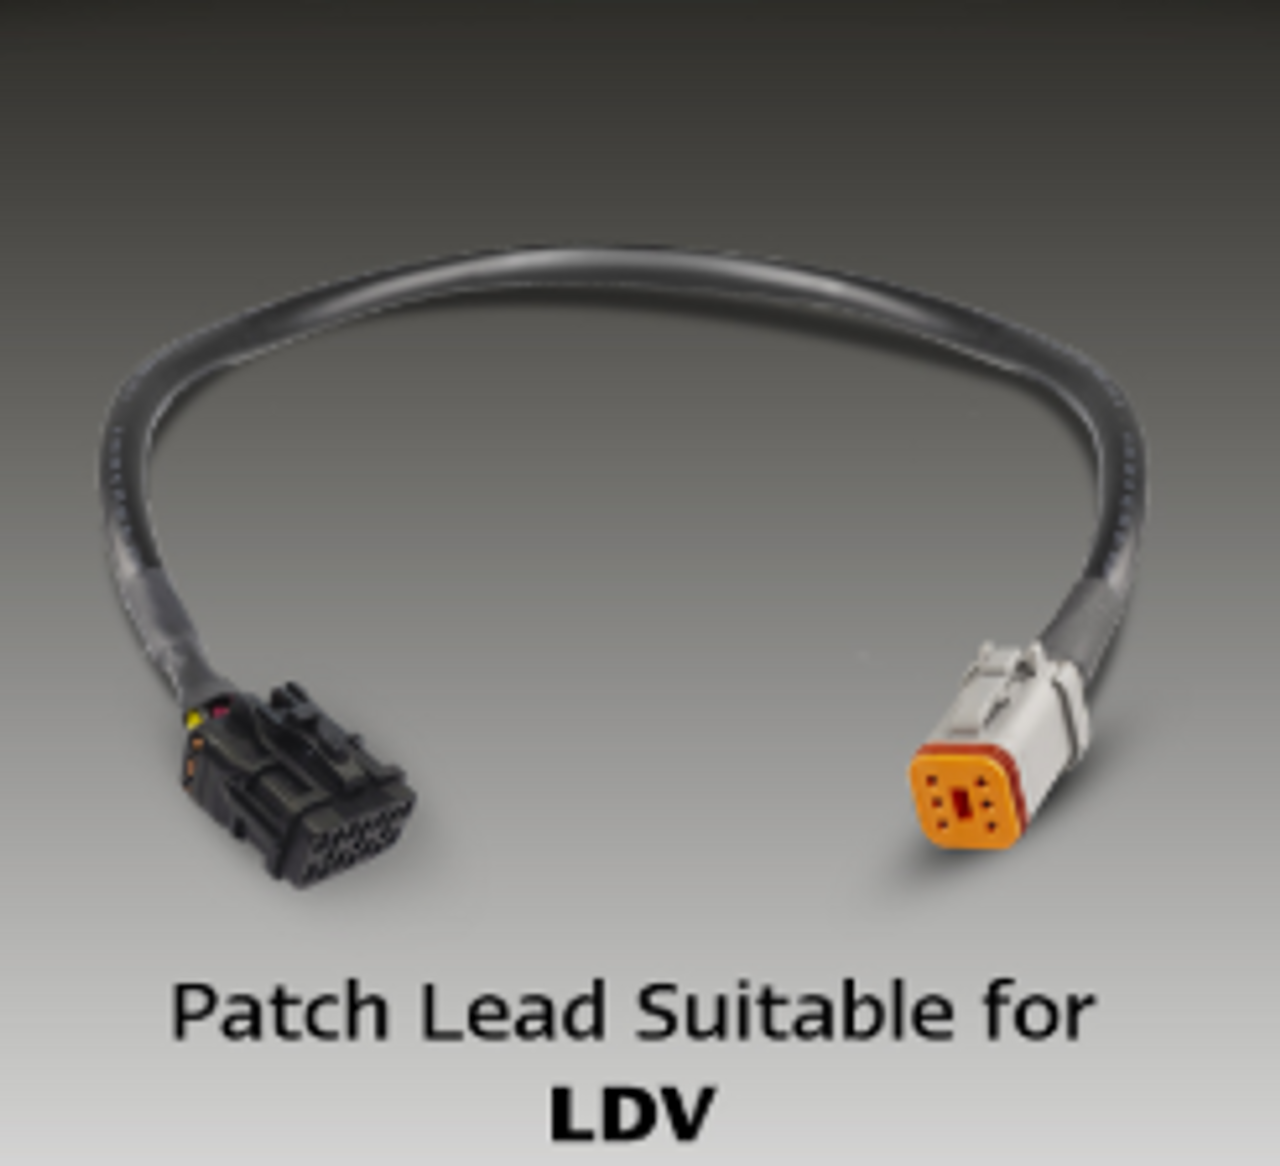 SOMAXI2LR/450B+PATCH-LDV - T60 T70 LED Patch Cable System. Plug and Play. LED Upgrade. Designed for Trays. MAXI2LR Series Light. Stop, Tail, Indicator and Reverse. 12v Only. Lamp with Conversion Cable. Application to Suit LDV T60/T70. Autolamp. Ultimate LED. 